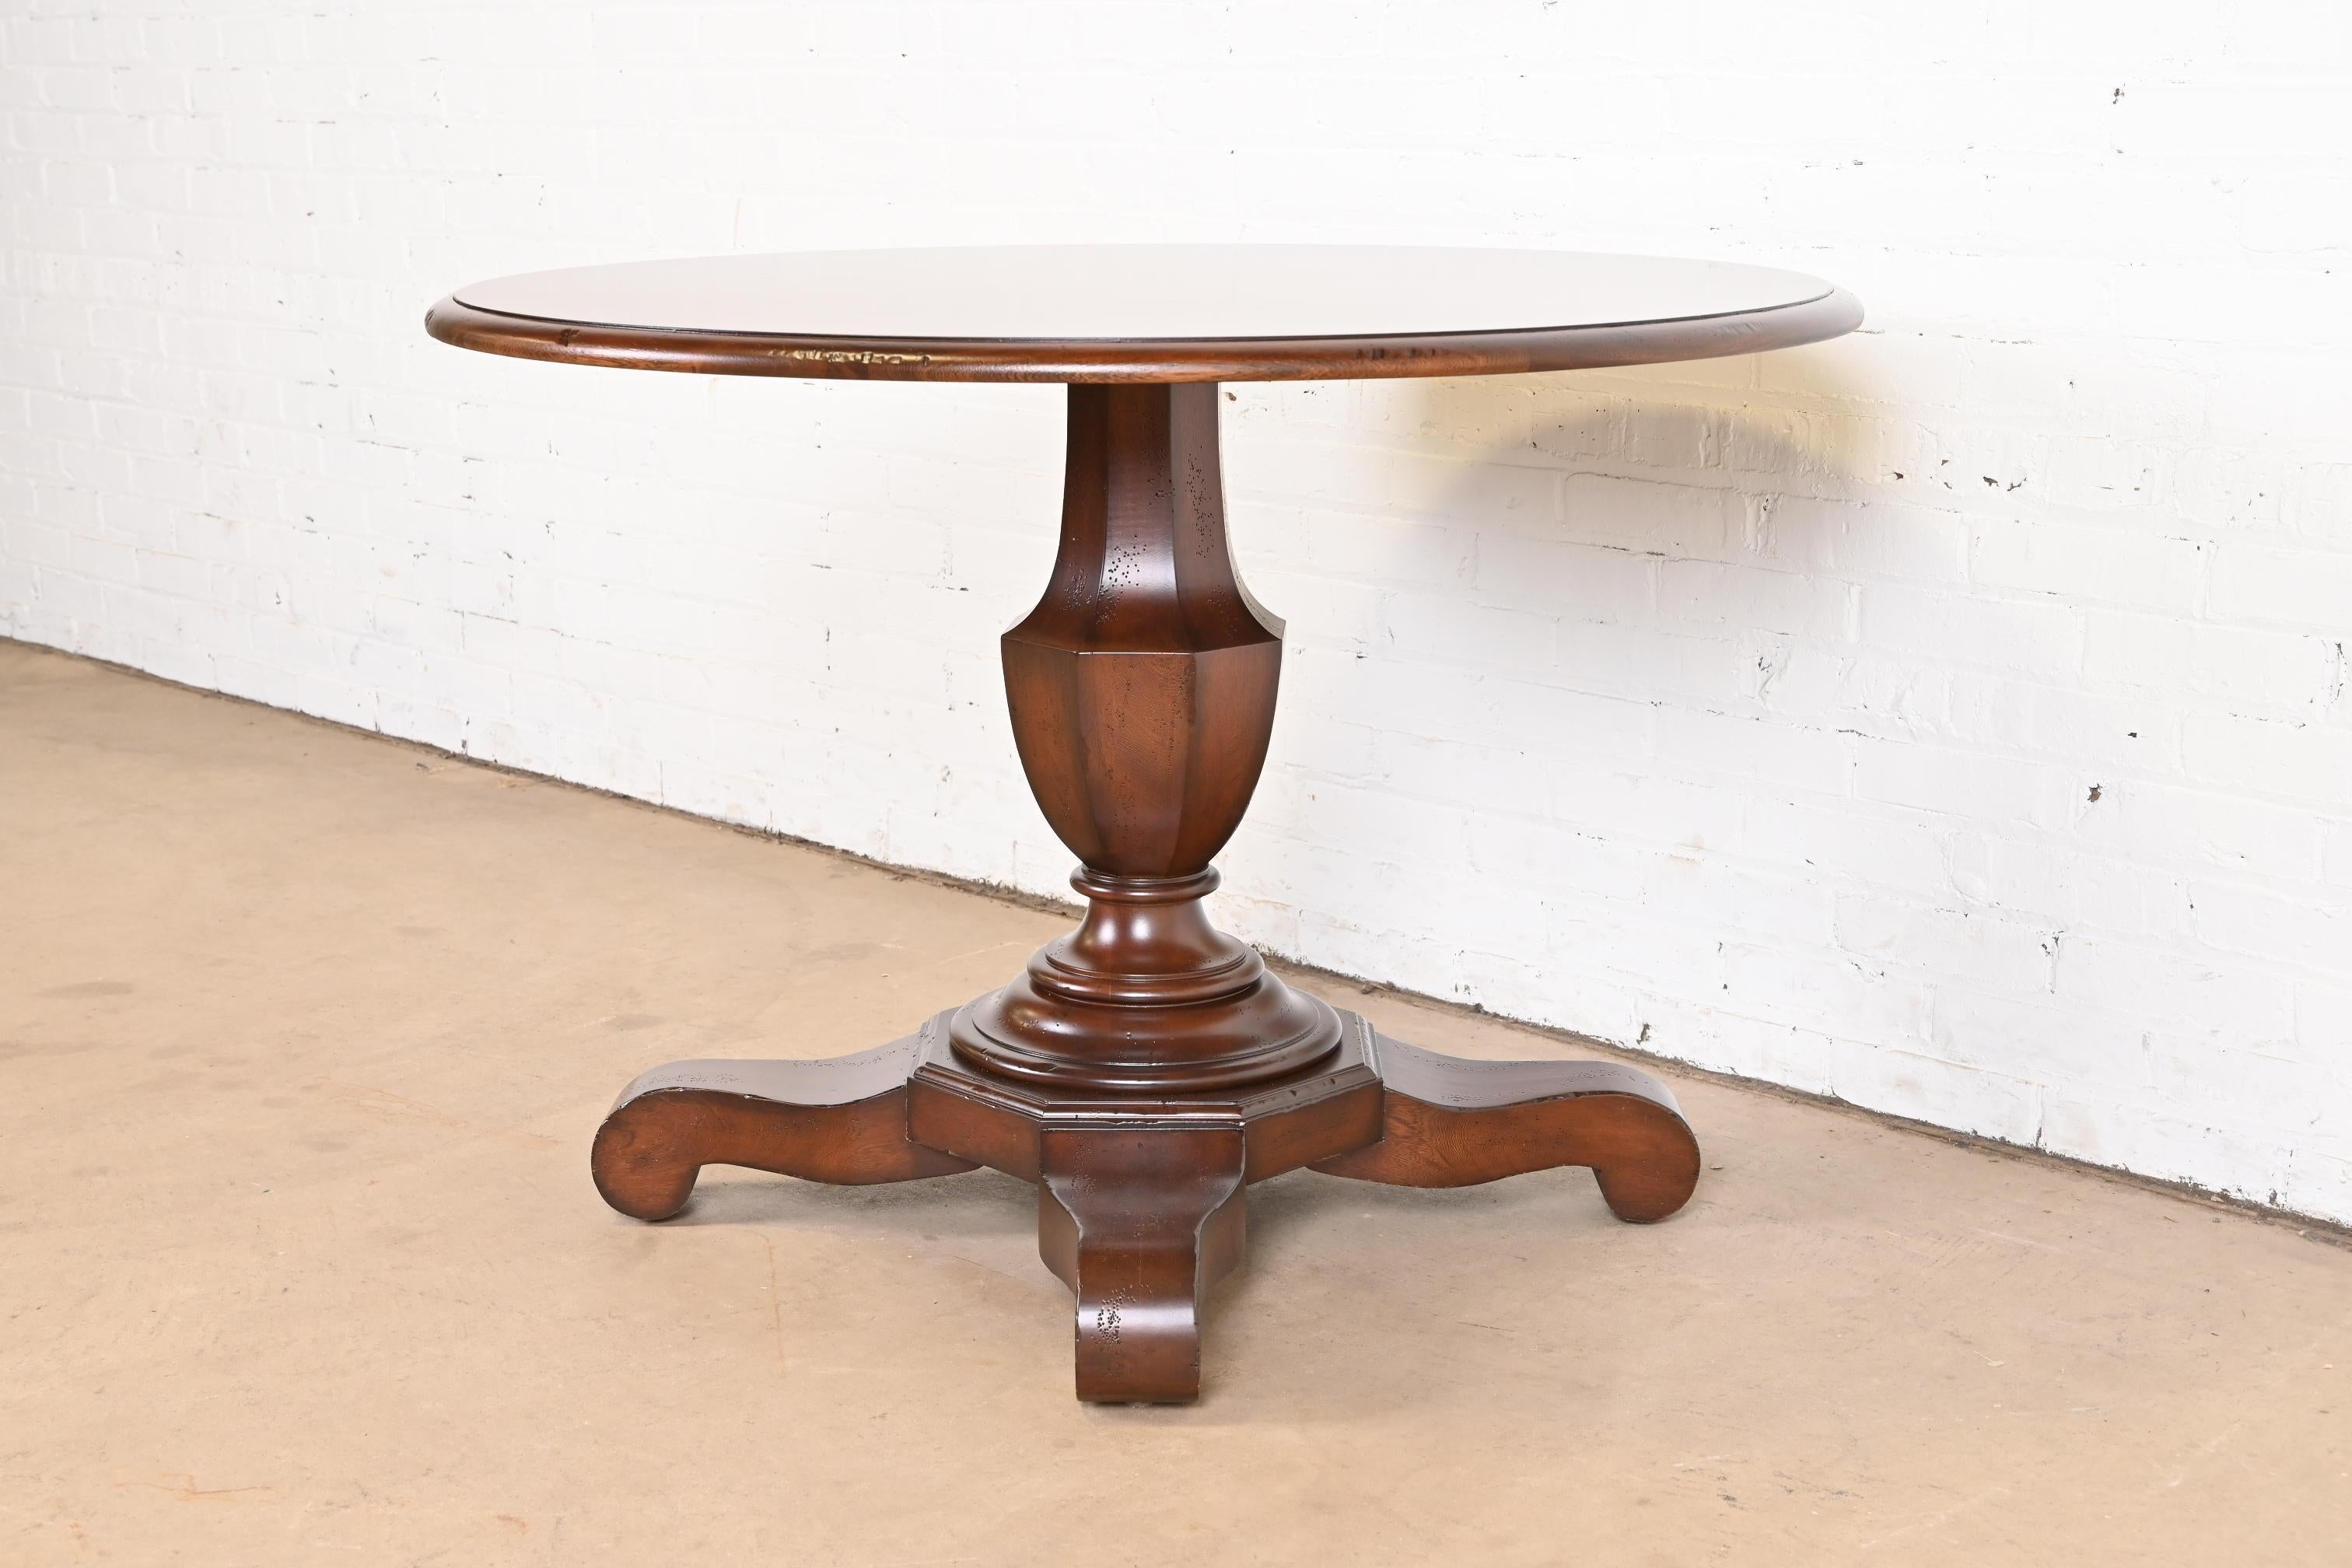 20th Century Baker Furniture Empire Carved Mahogany Pedestal Breakfast Table or Center Table